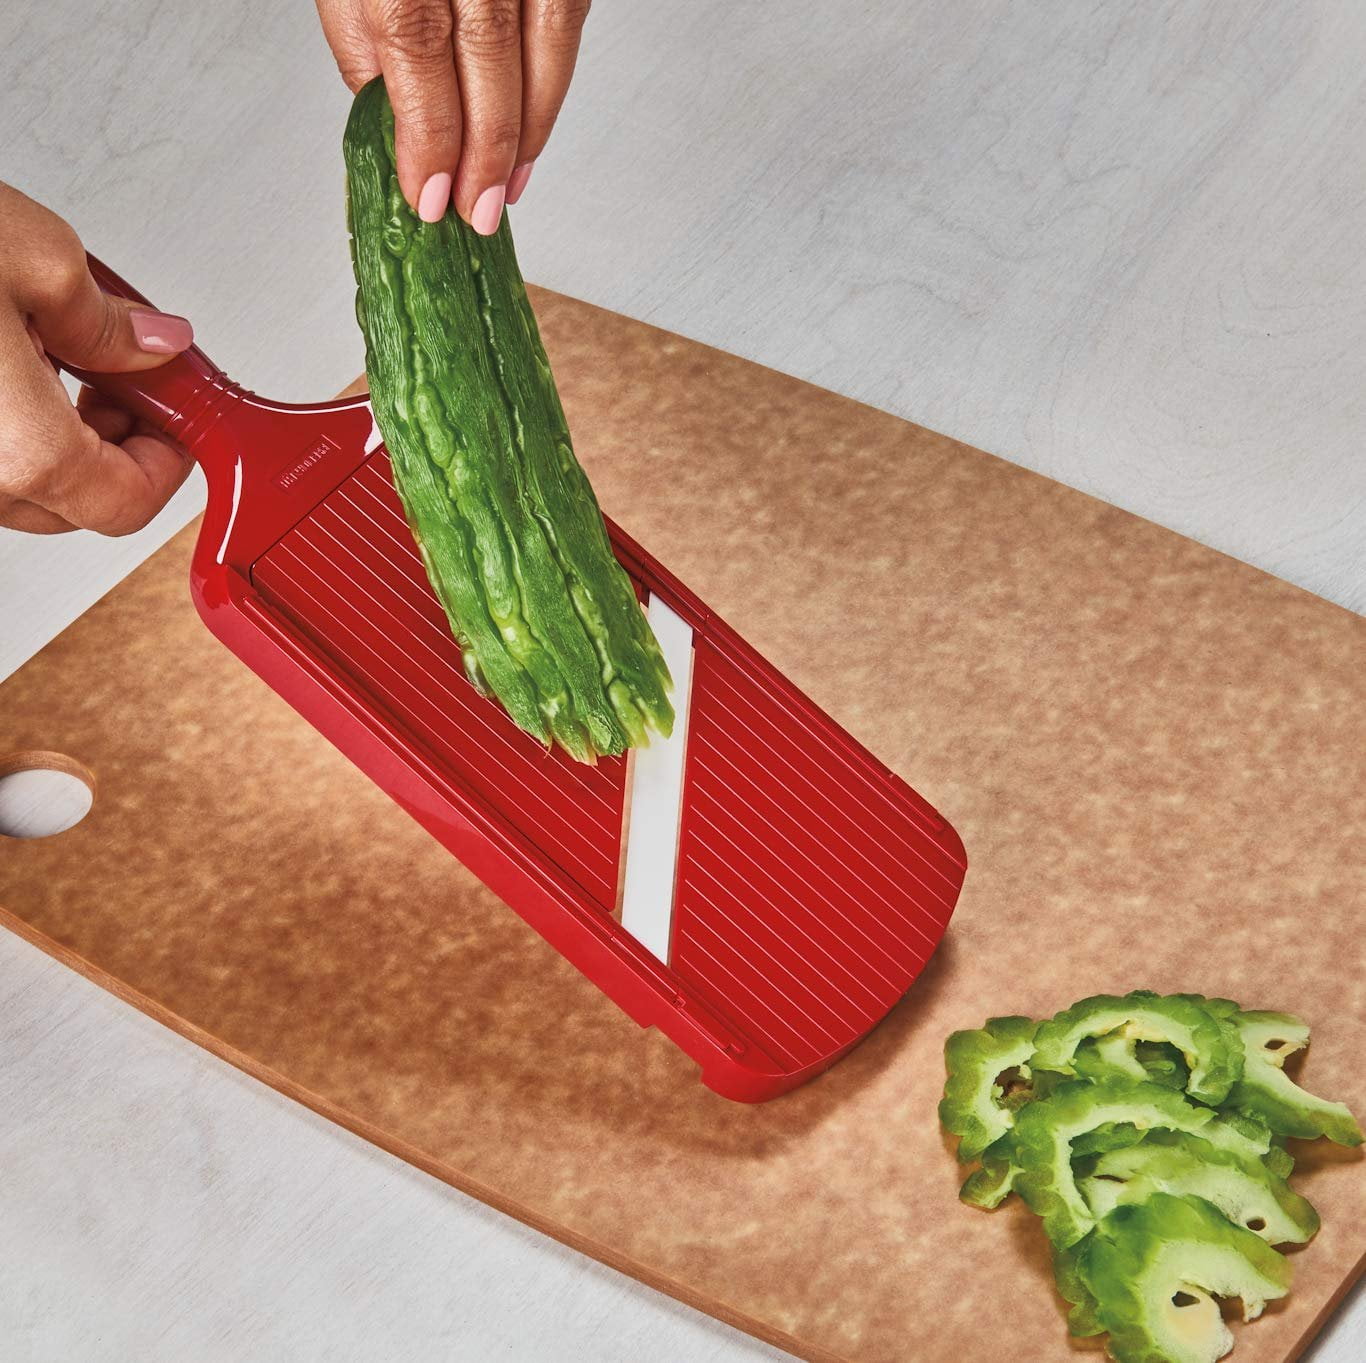 Kyocera CWS-230 Ceramic Wide Slicer with Protector